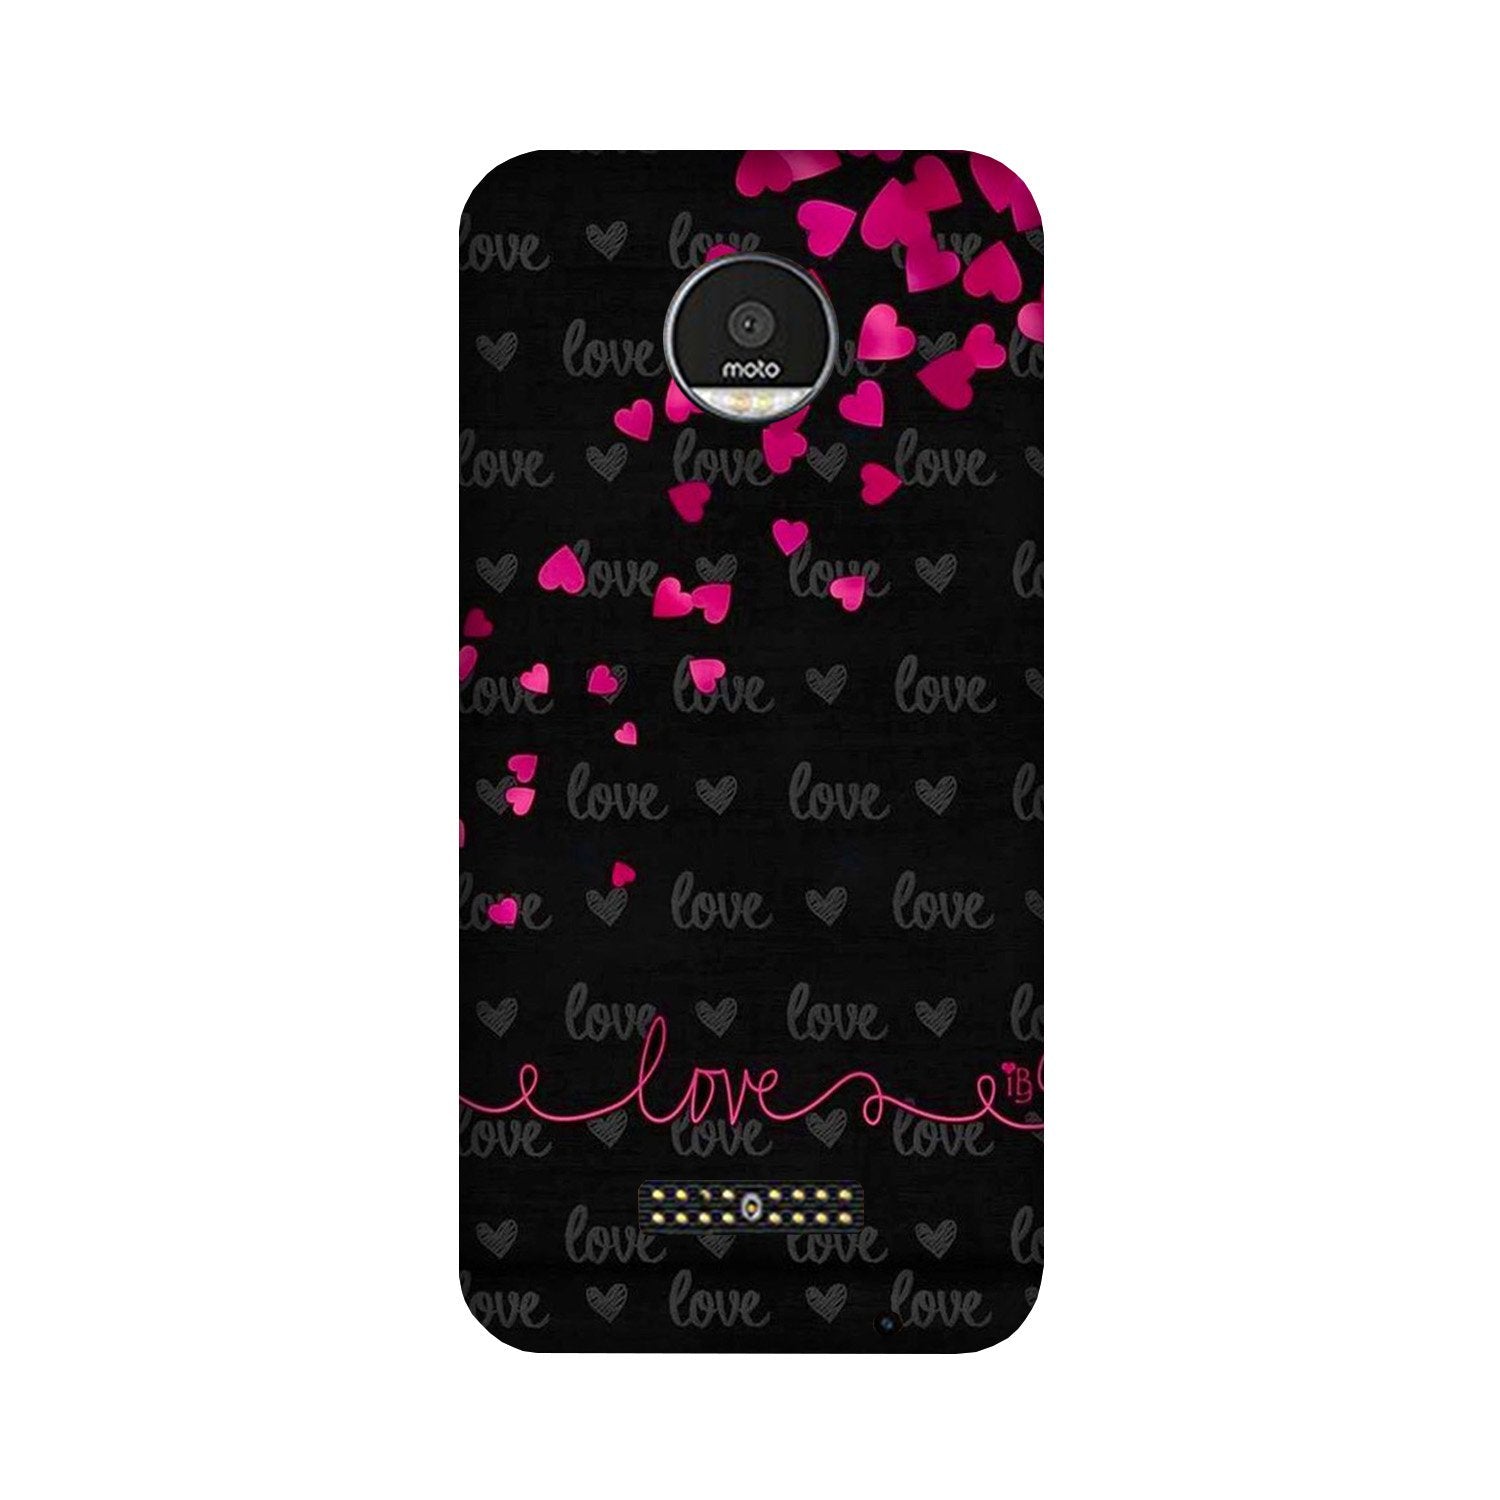 Love in Air Case for Moto Z2 Play